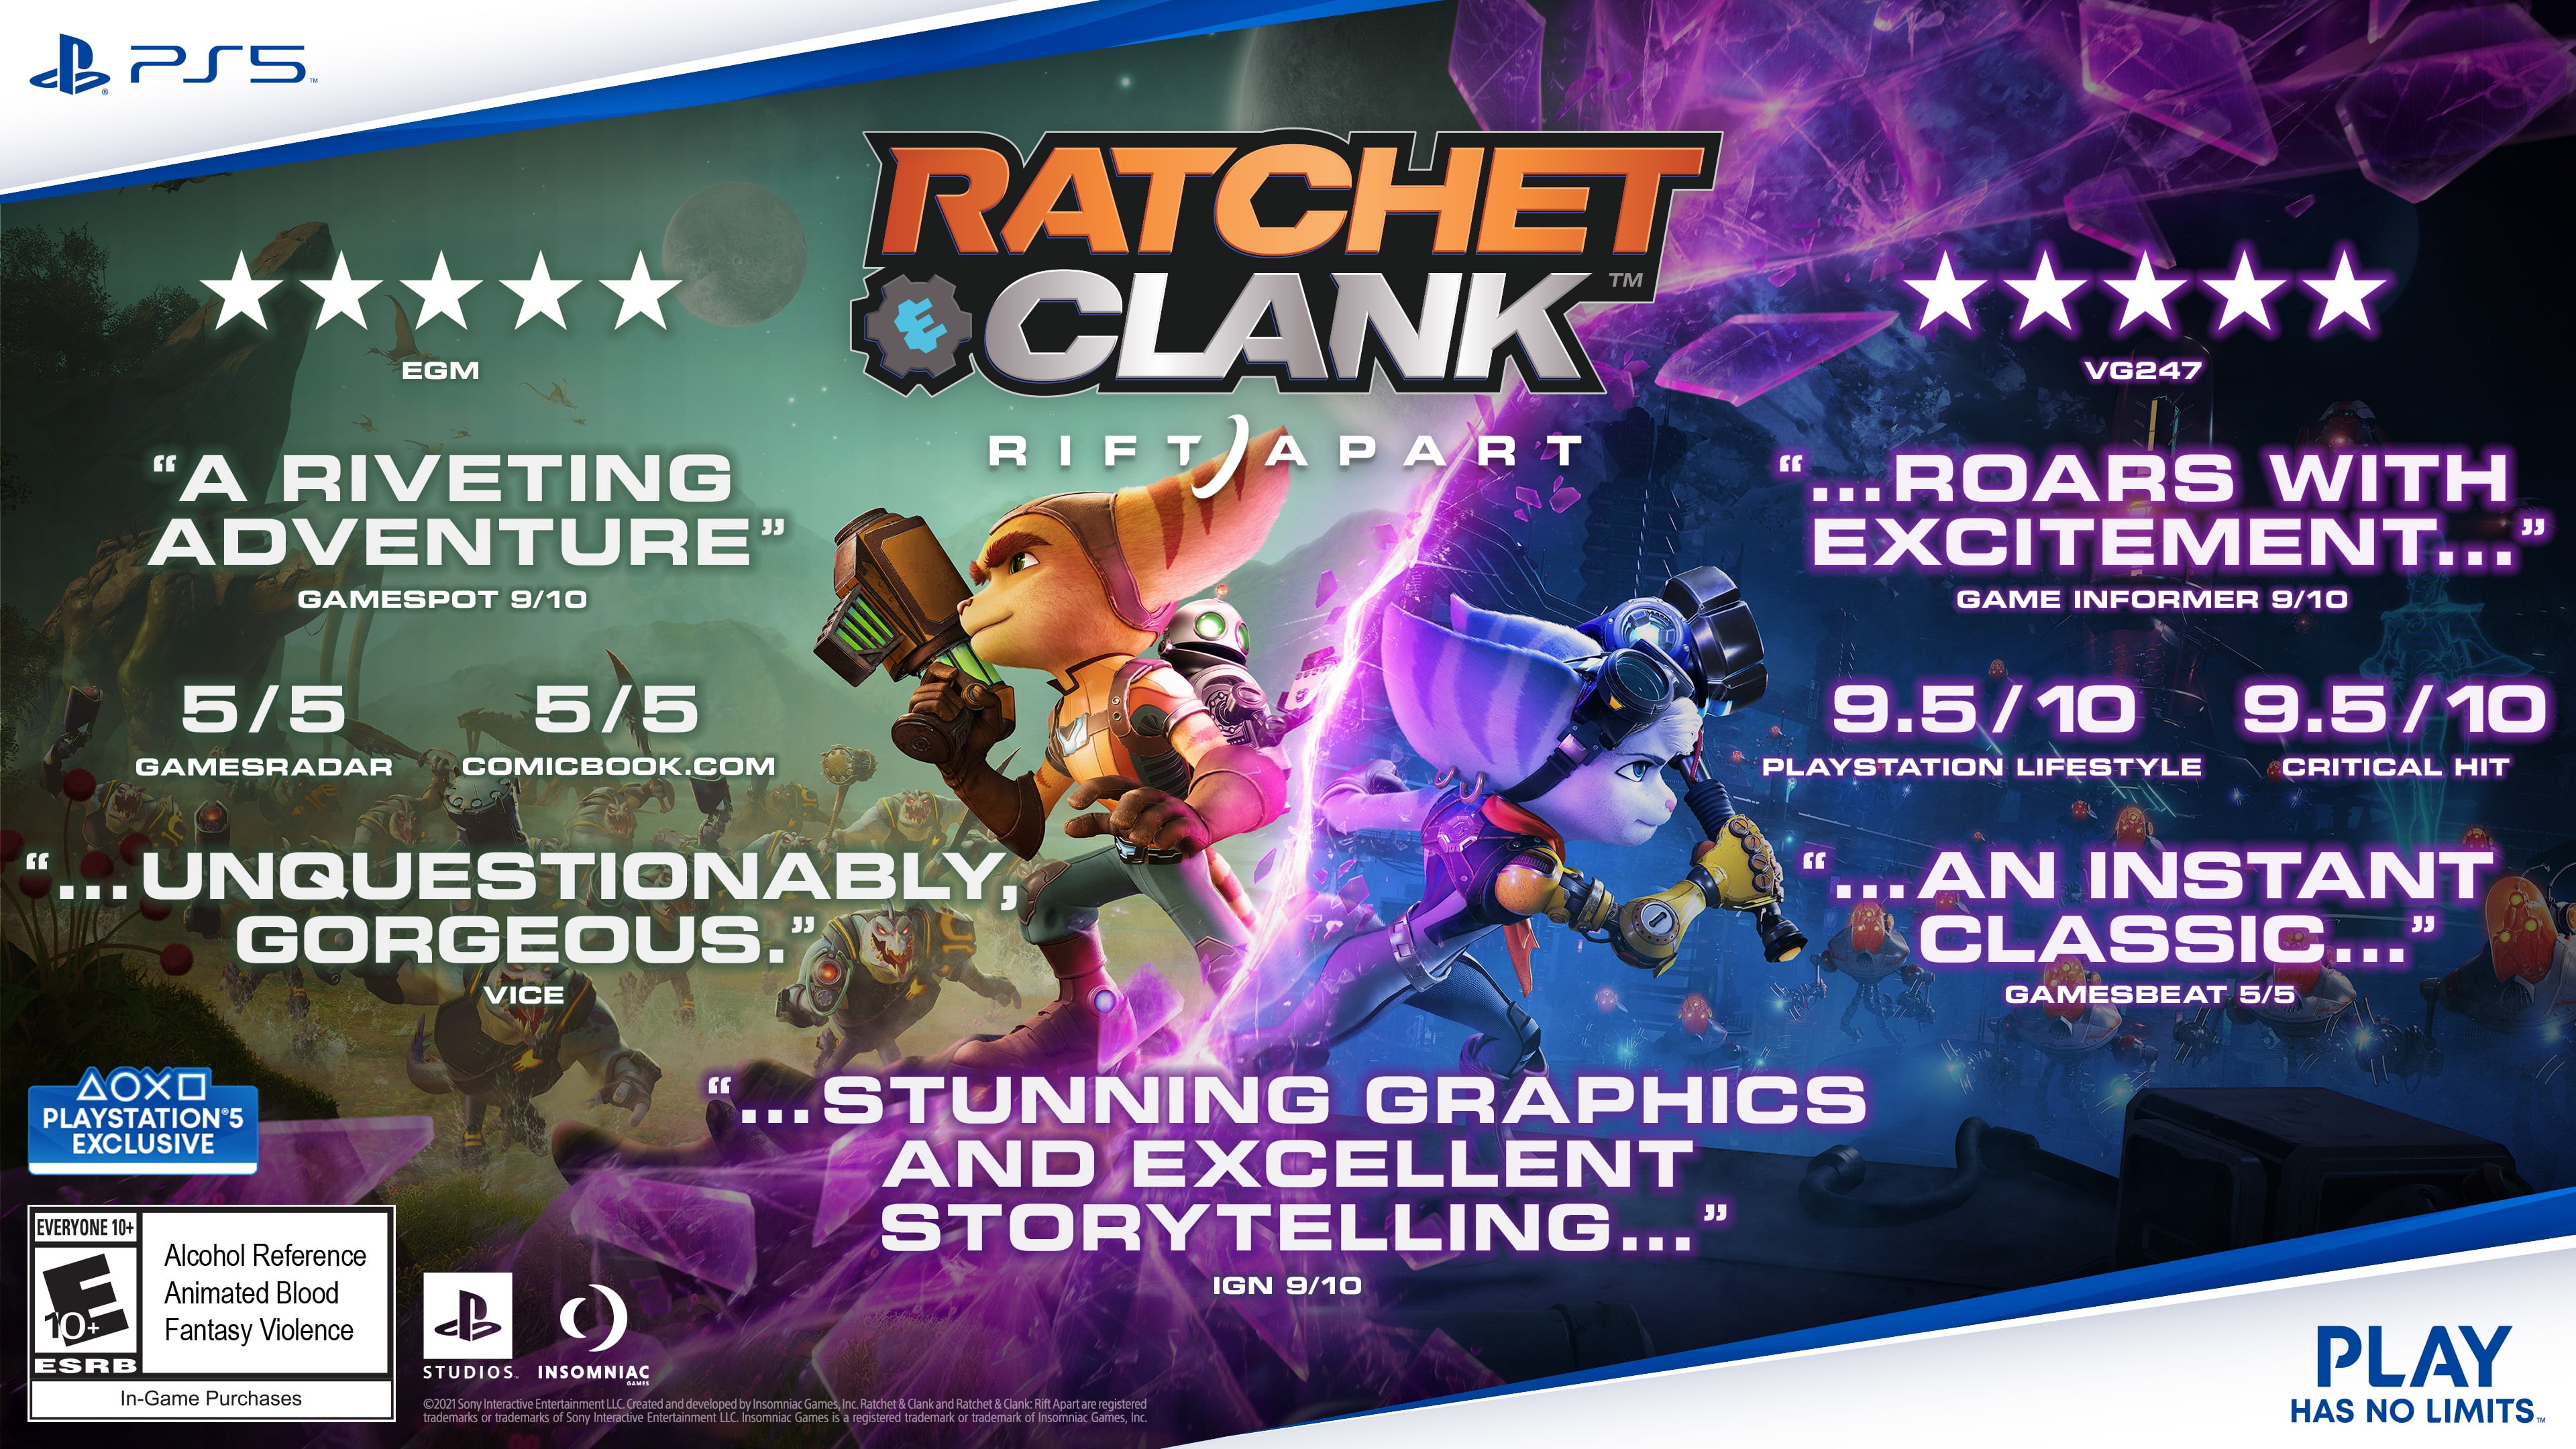 Ratchet and Clank Rift Apart for Playstation 5 for Sale in Duncan